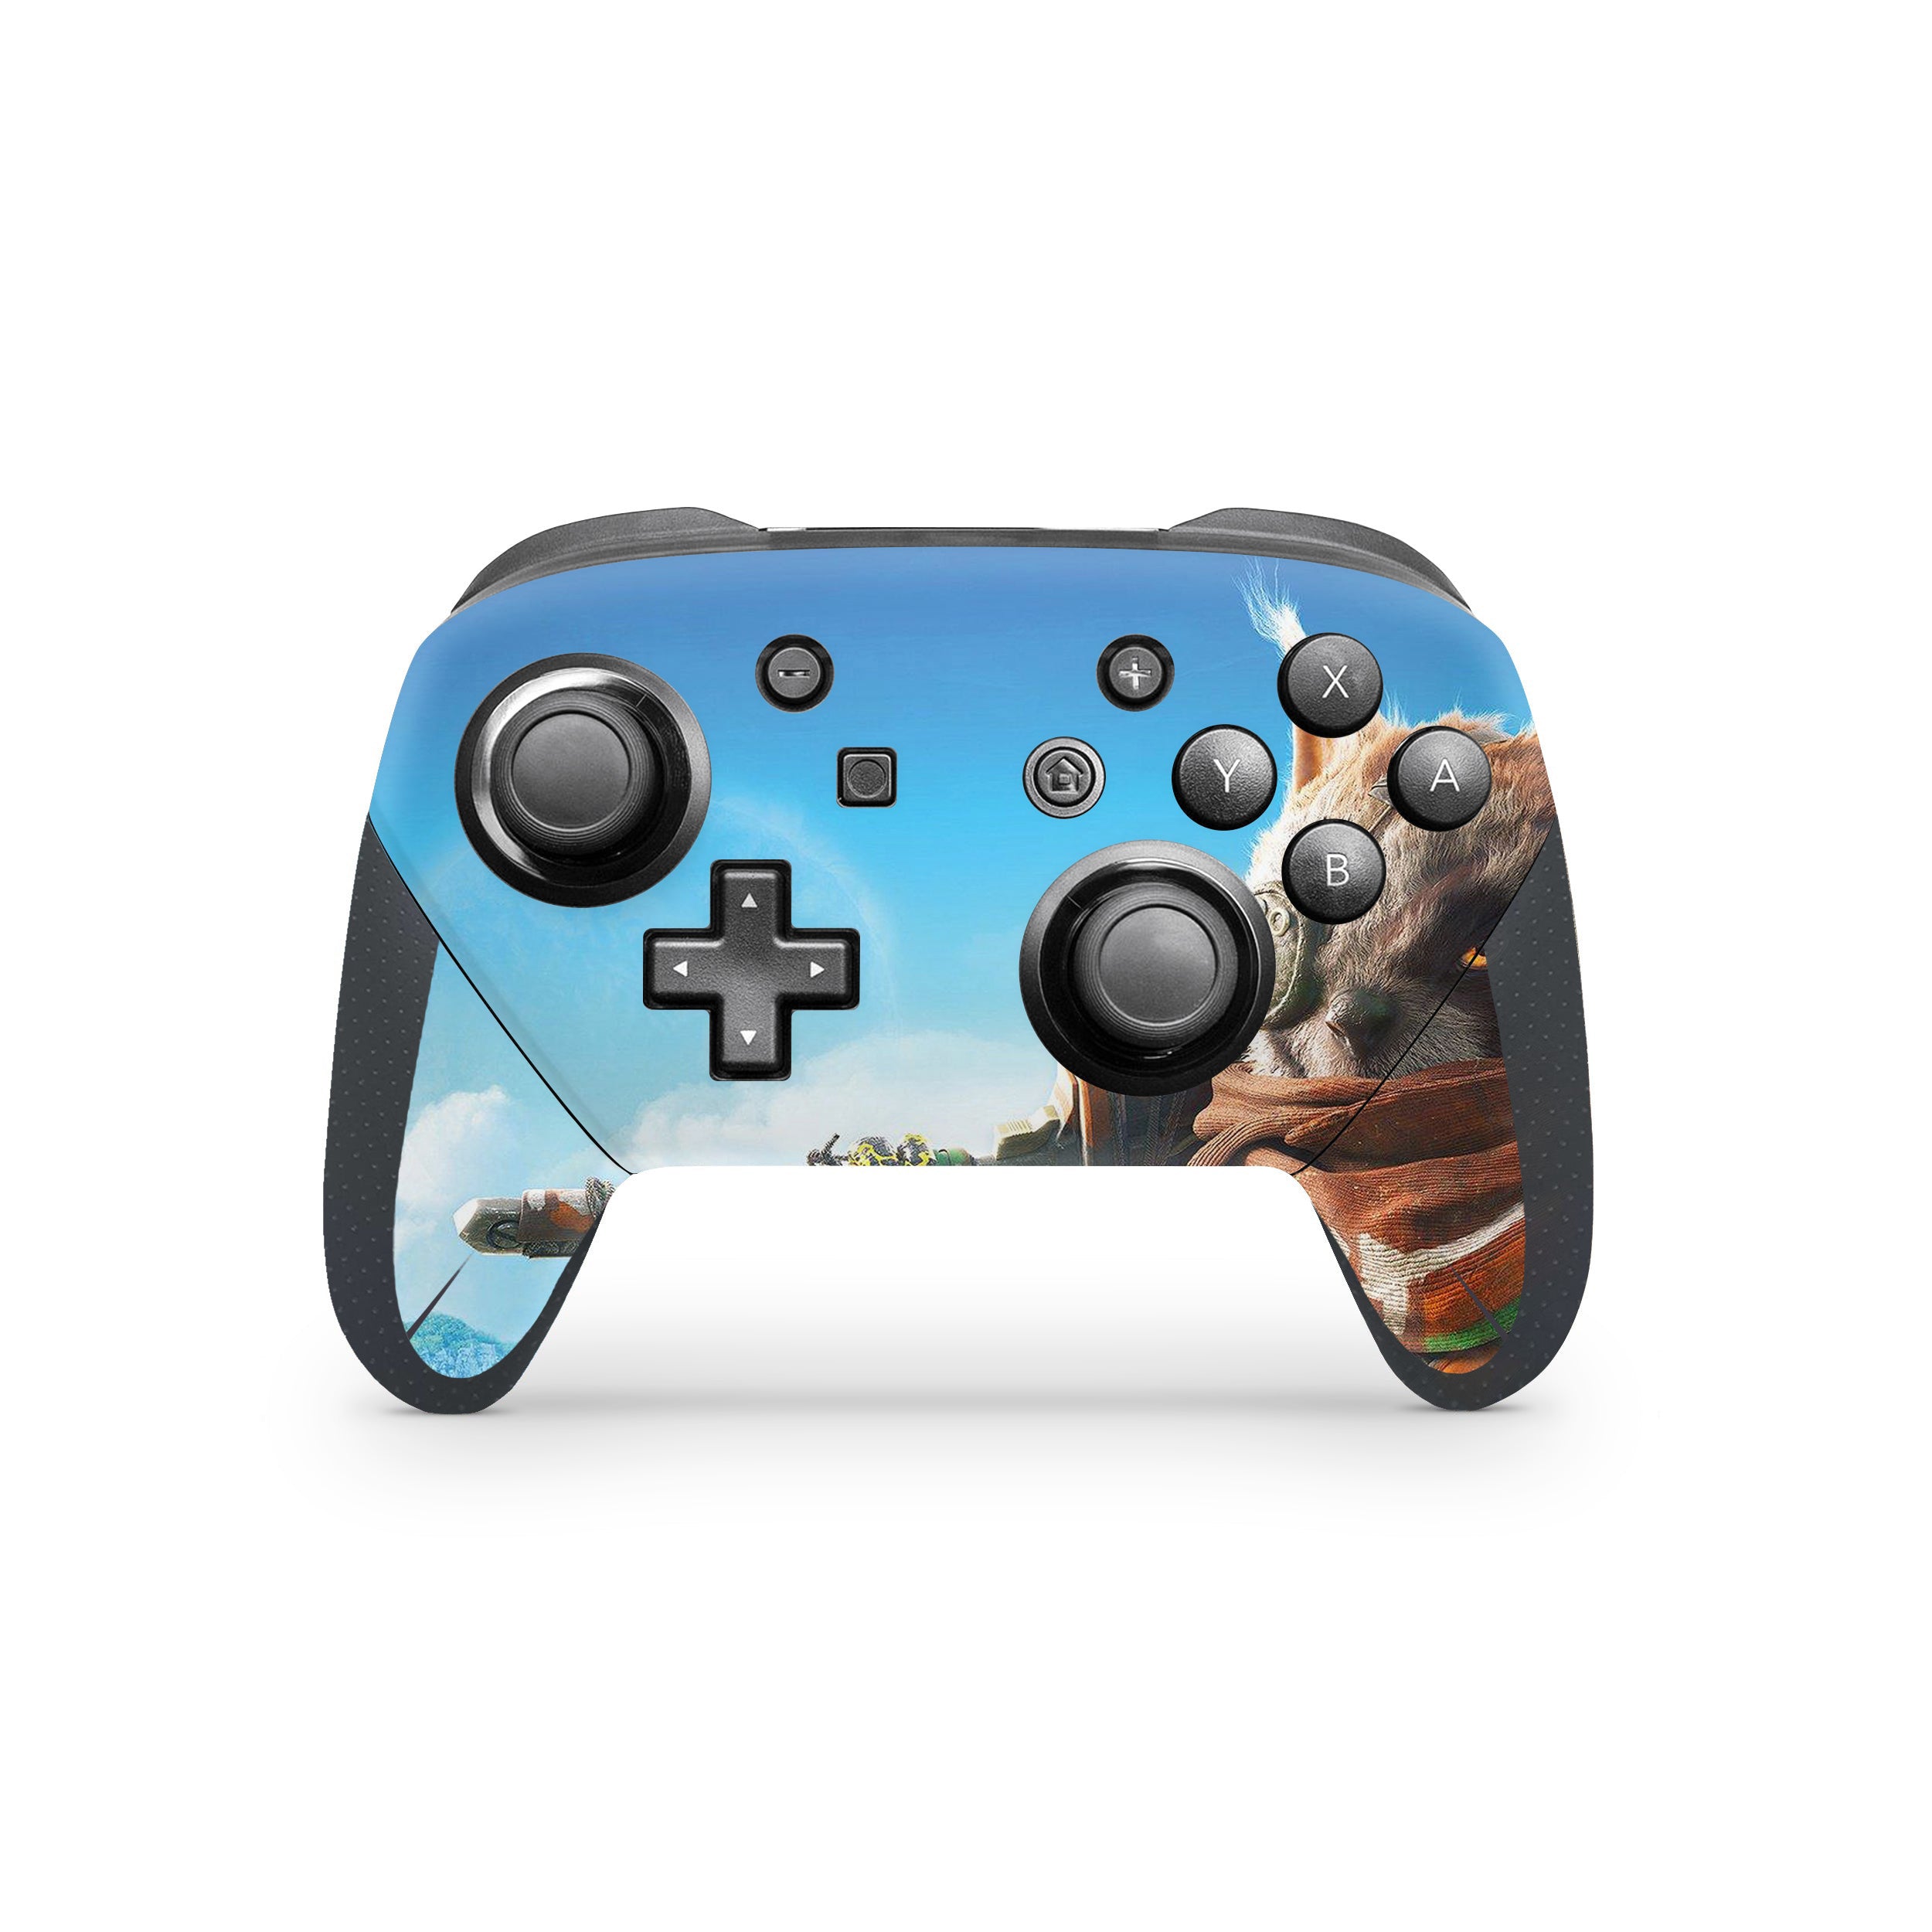 A video game skin featuring a Biomutant design for the Switch Pro Controller.